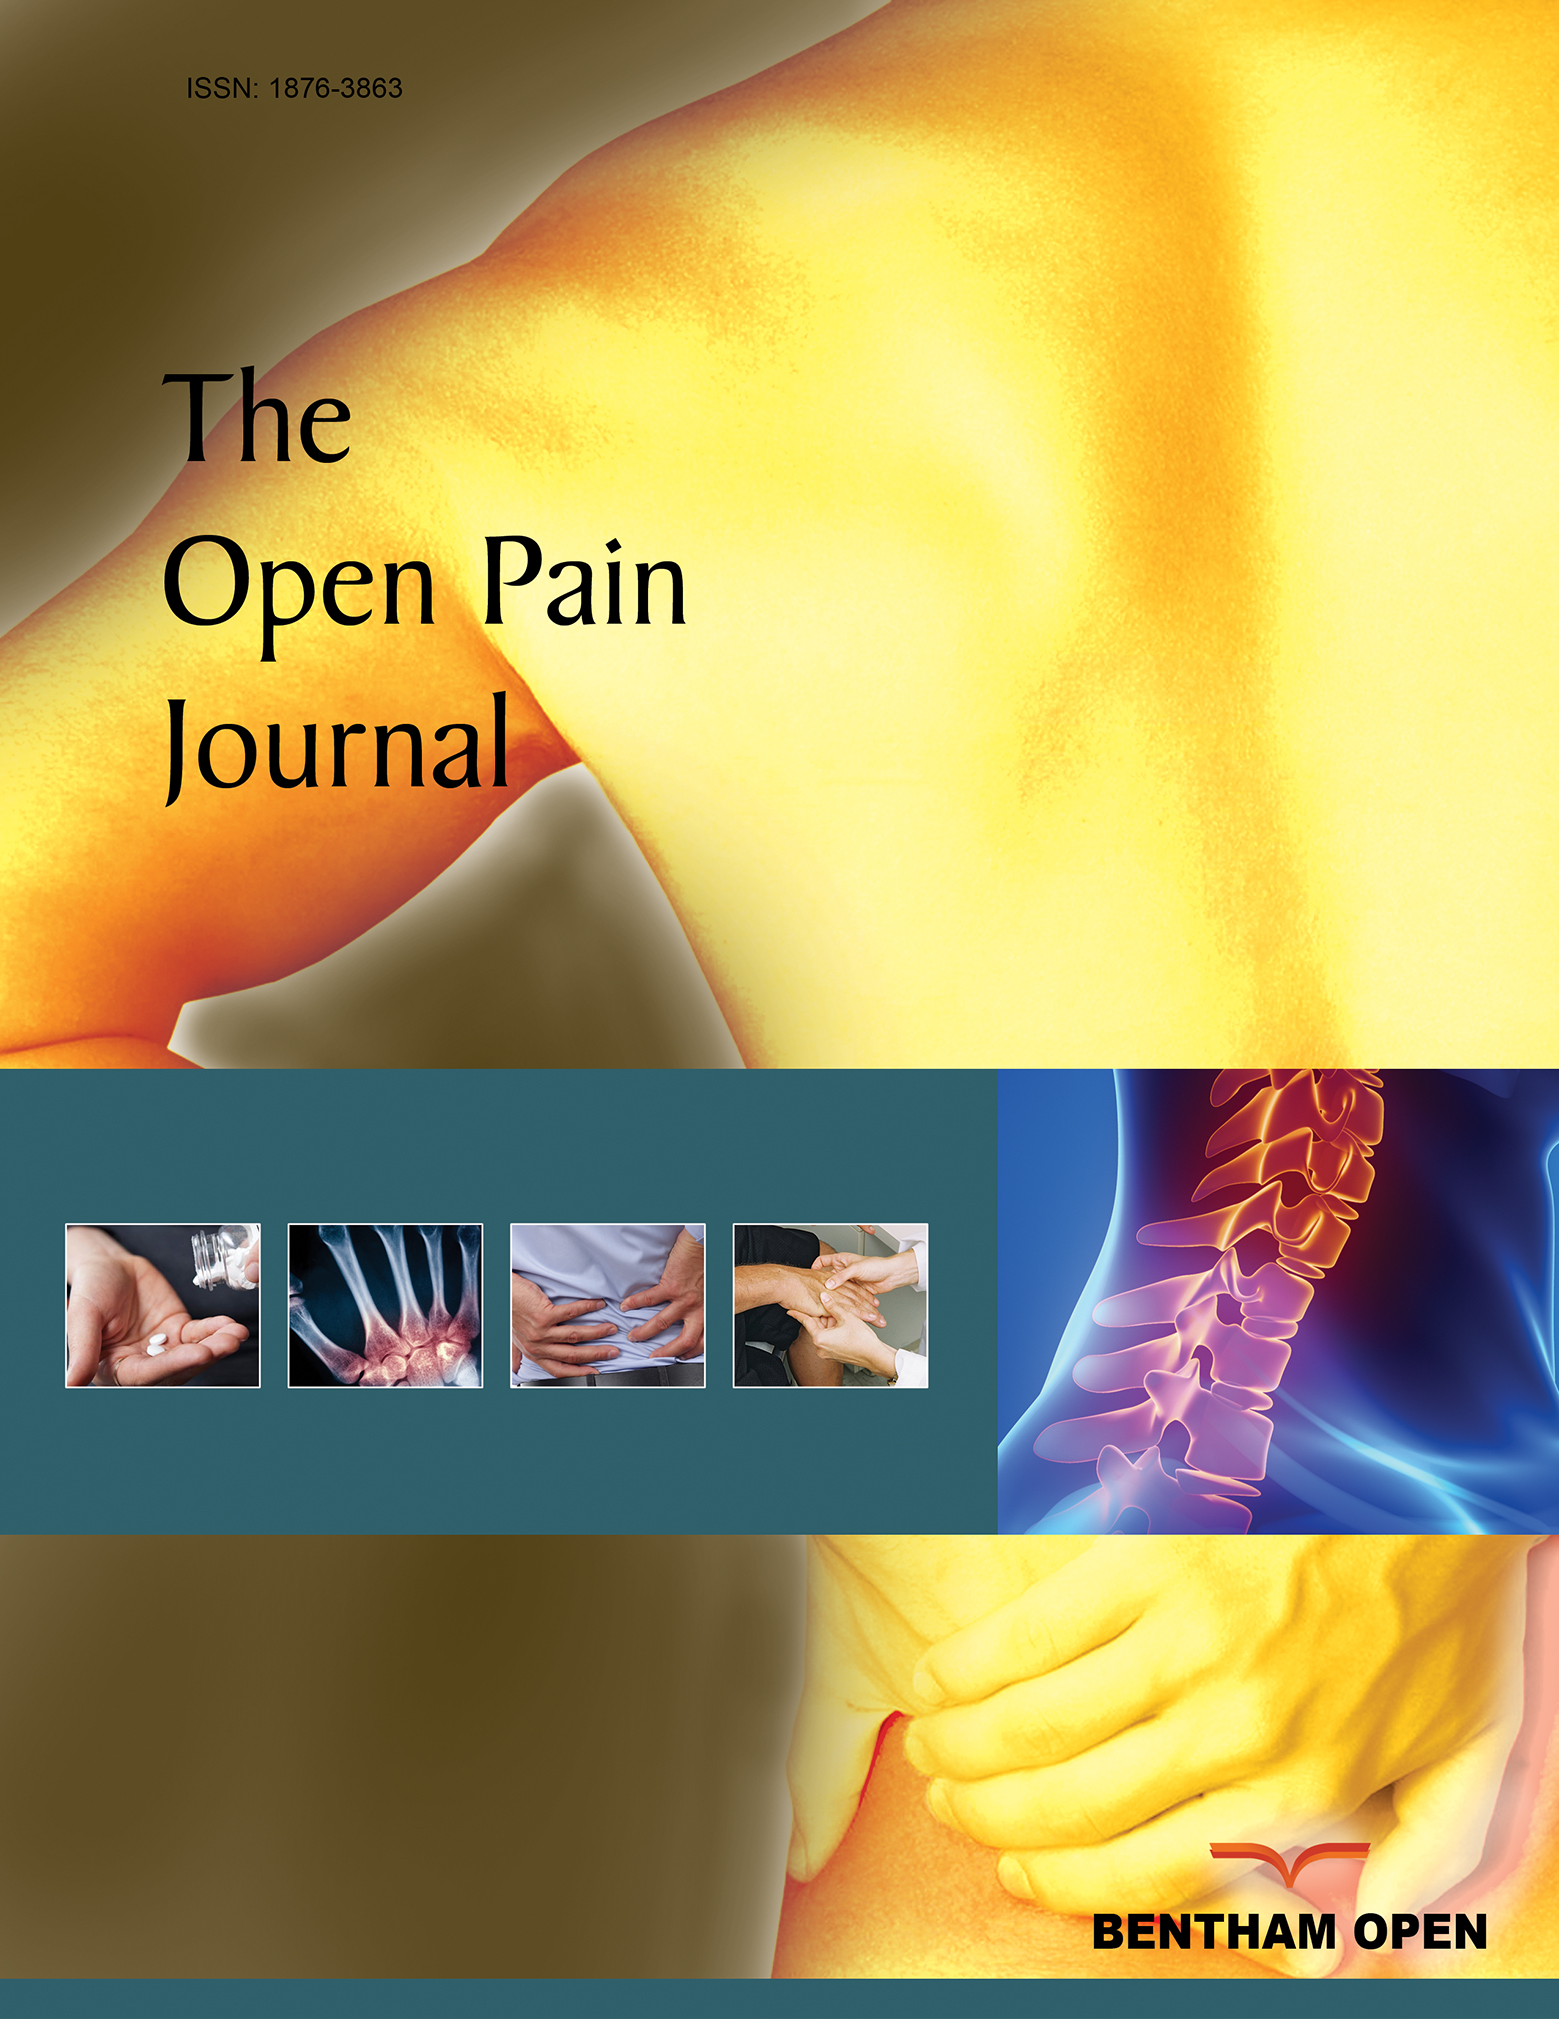 The Open Pain Journal